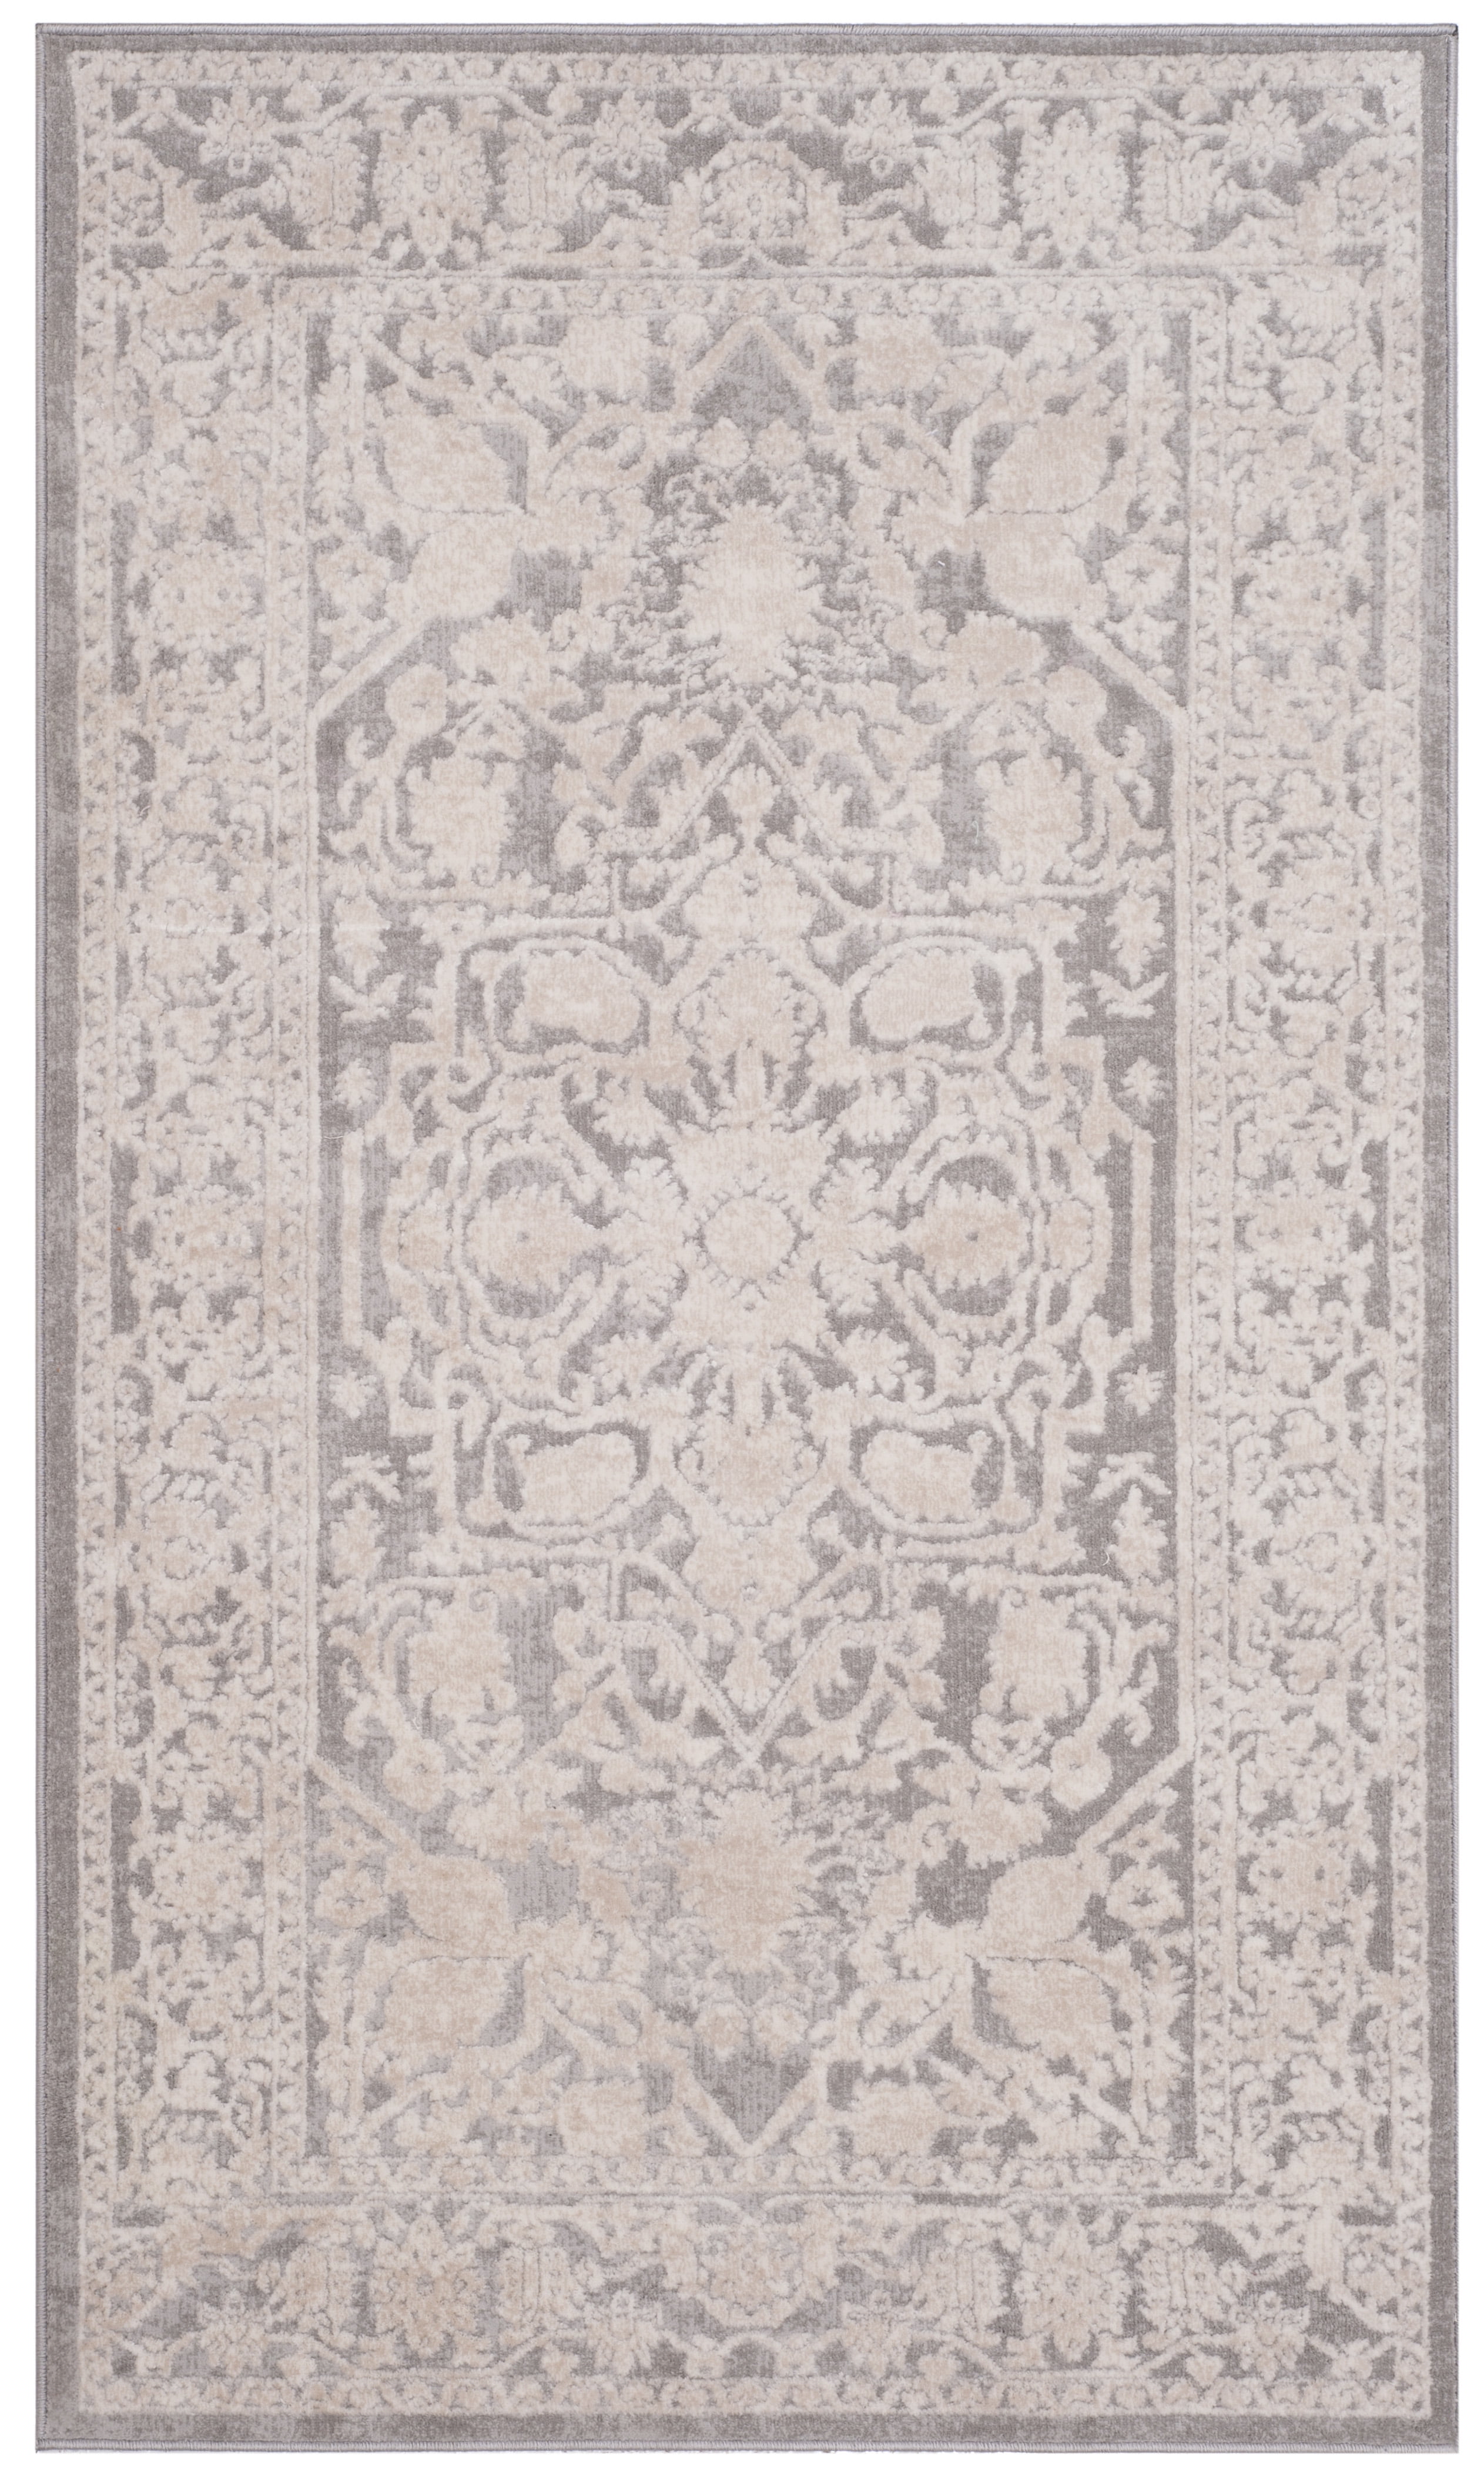 SAFAVIEH Reflection Collection RFT665C Boho Tribal Distressed Living Room Bedroom Entryway Accent Area Rug 3' x 3' Square Light Grey/Cream